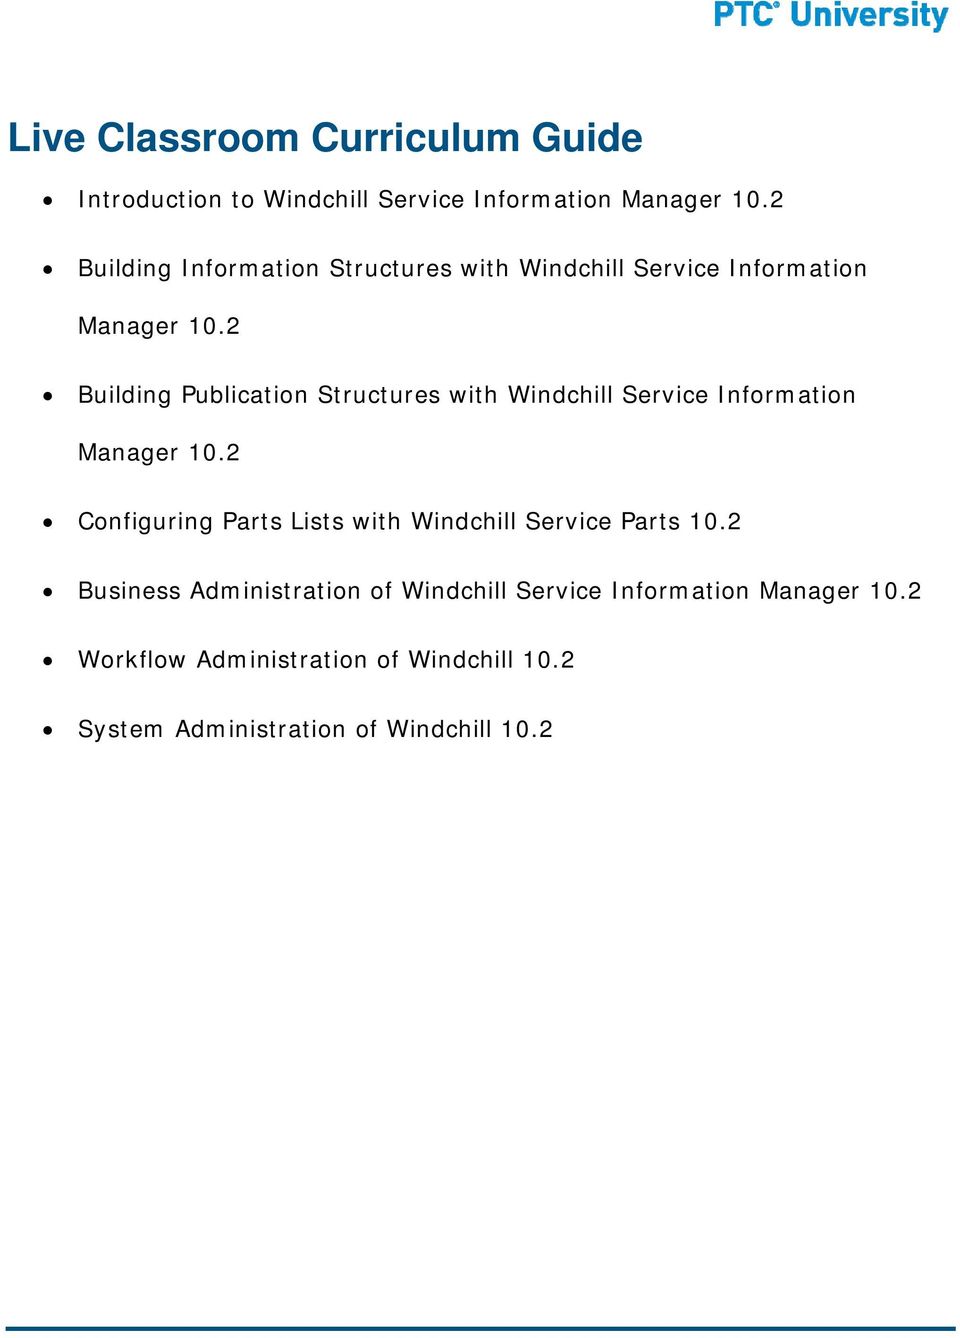 2 Building Publication Structures with Windchill Service Information Manager 10.